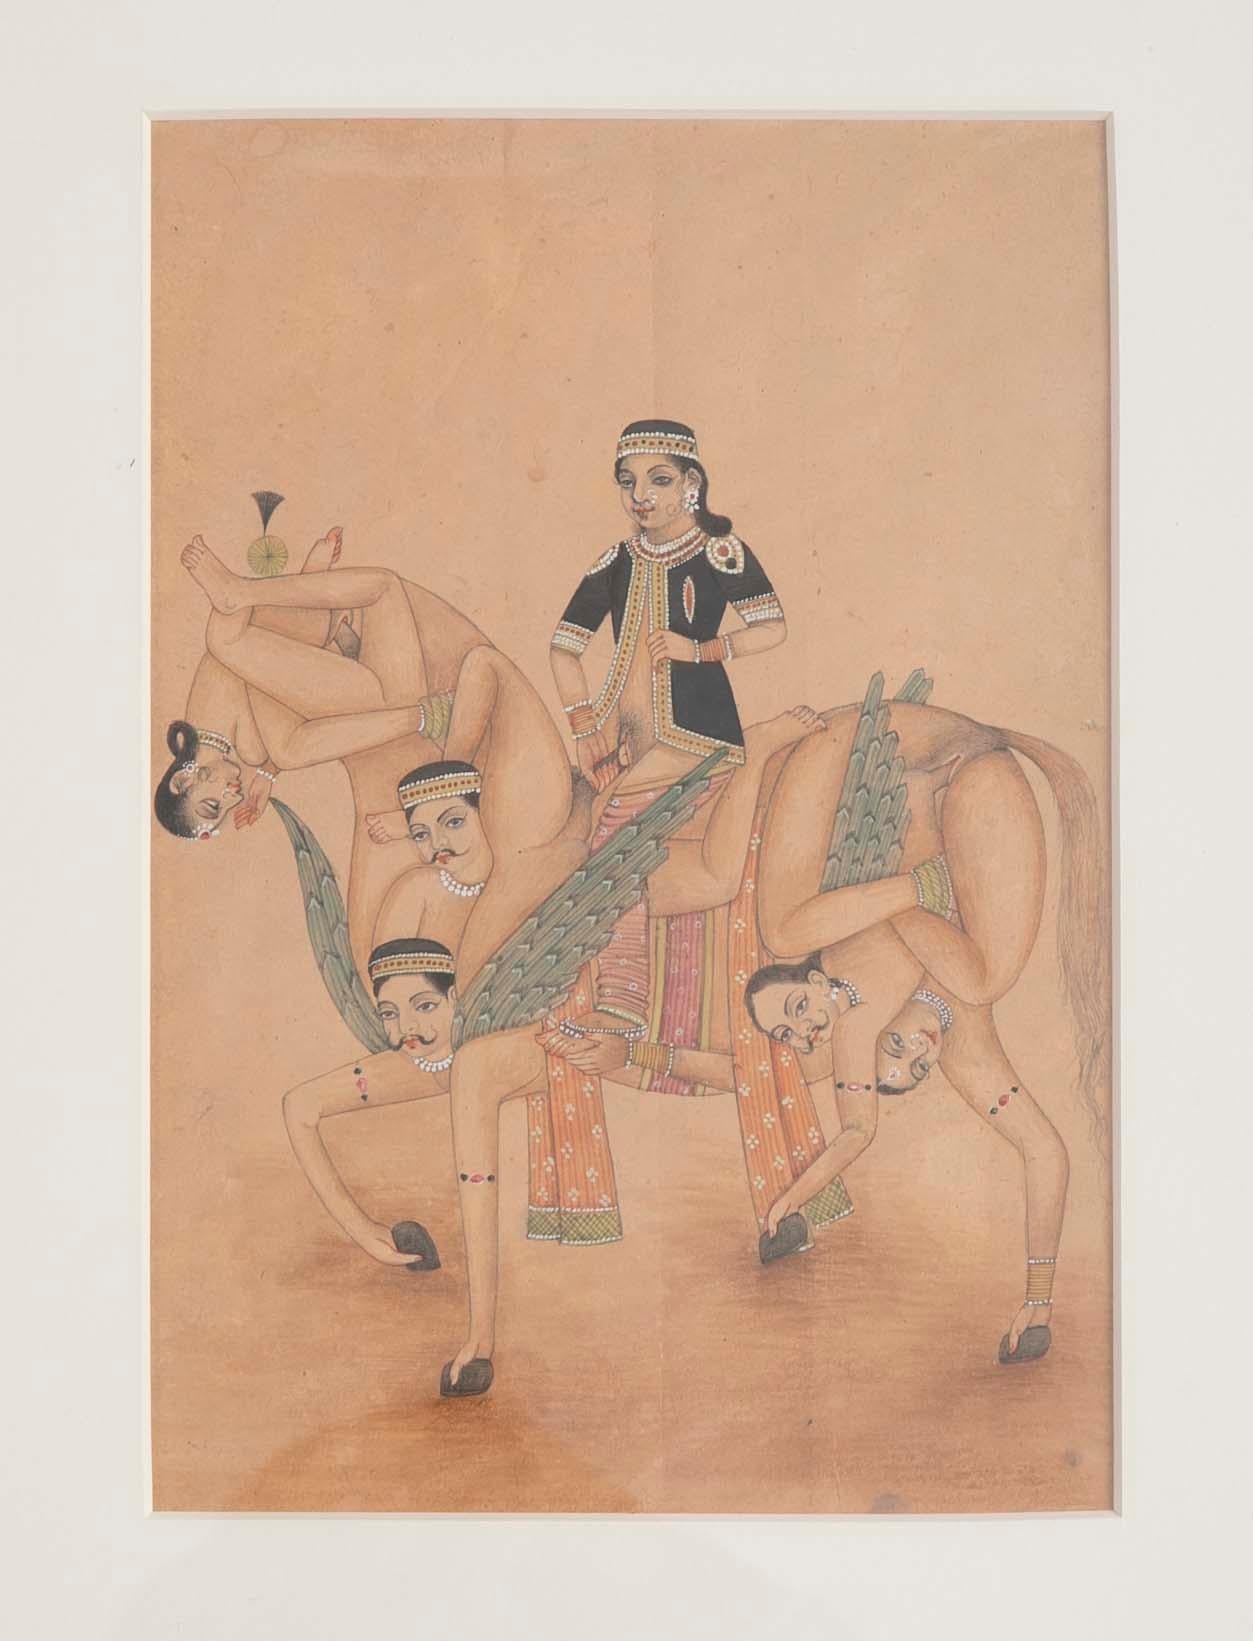 A very unusual Indian erotic zoomorphic gouache depicting a horse formed from couples engaging in various sexual positions, with a female rider. The actions of the couples juxtaposed with the calm demeanor on their faces, makes these gouaches quite